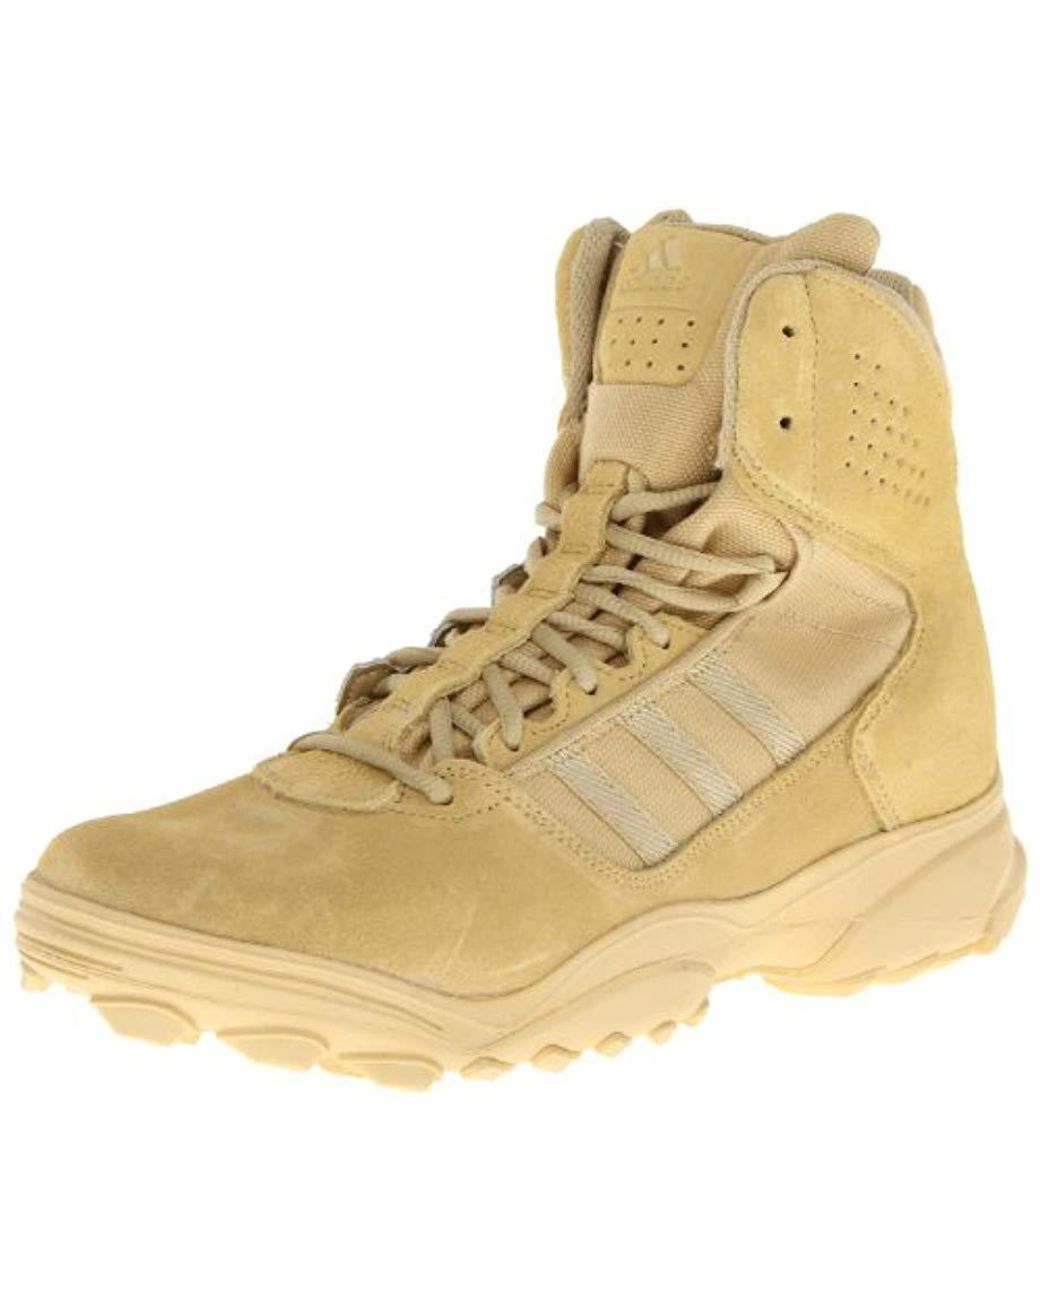 adidas Gsg-9.3 Boot for | Lyst